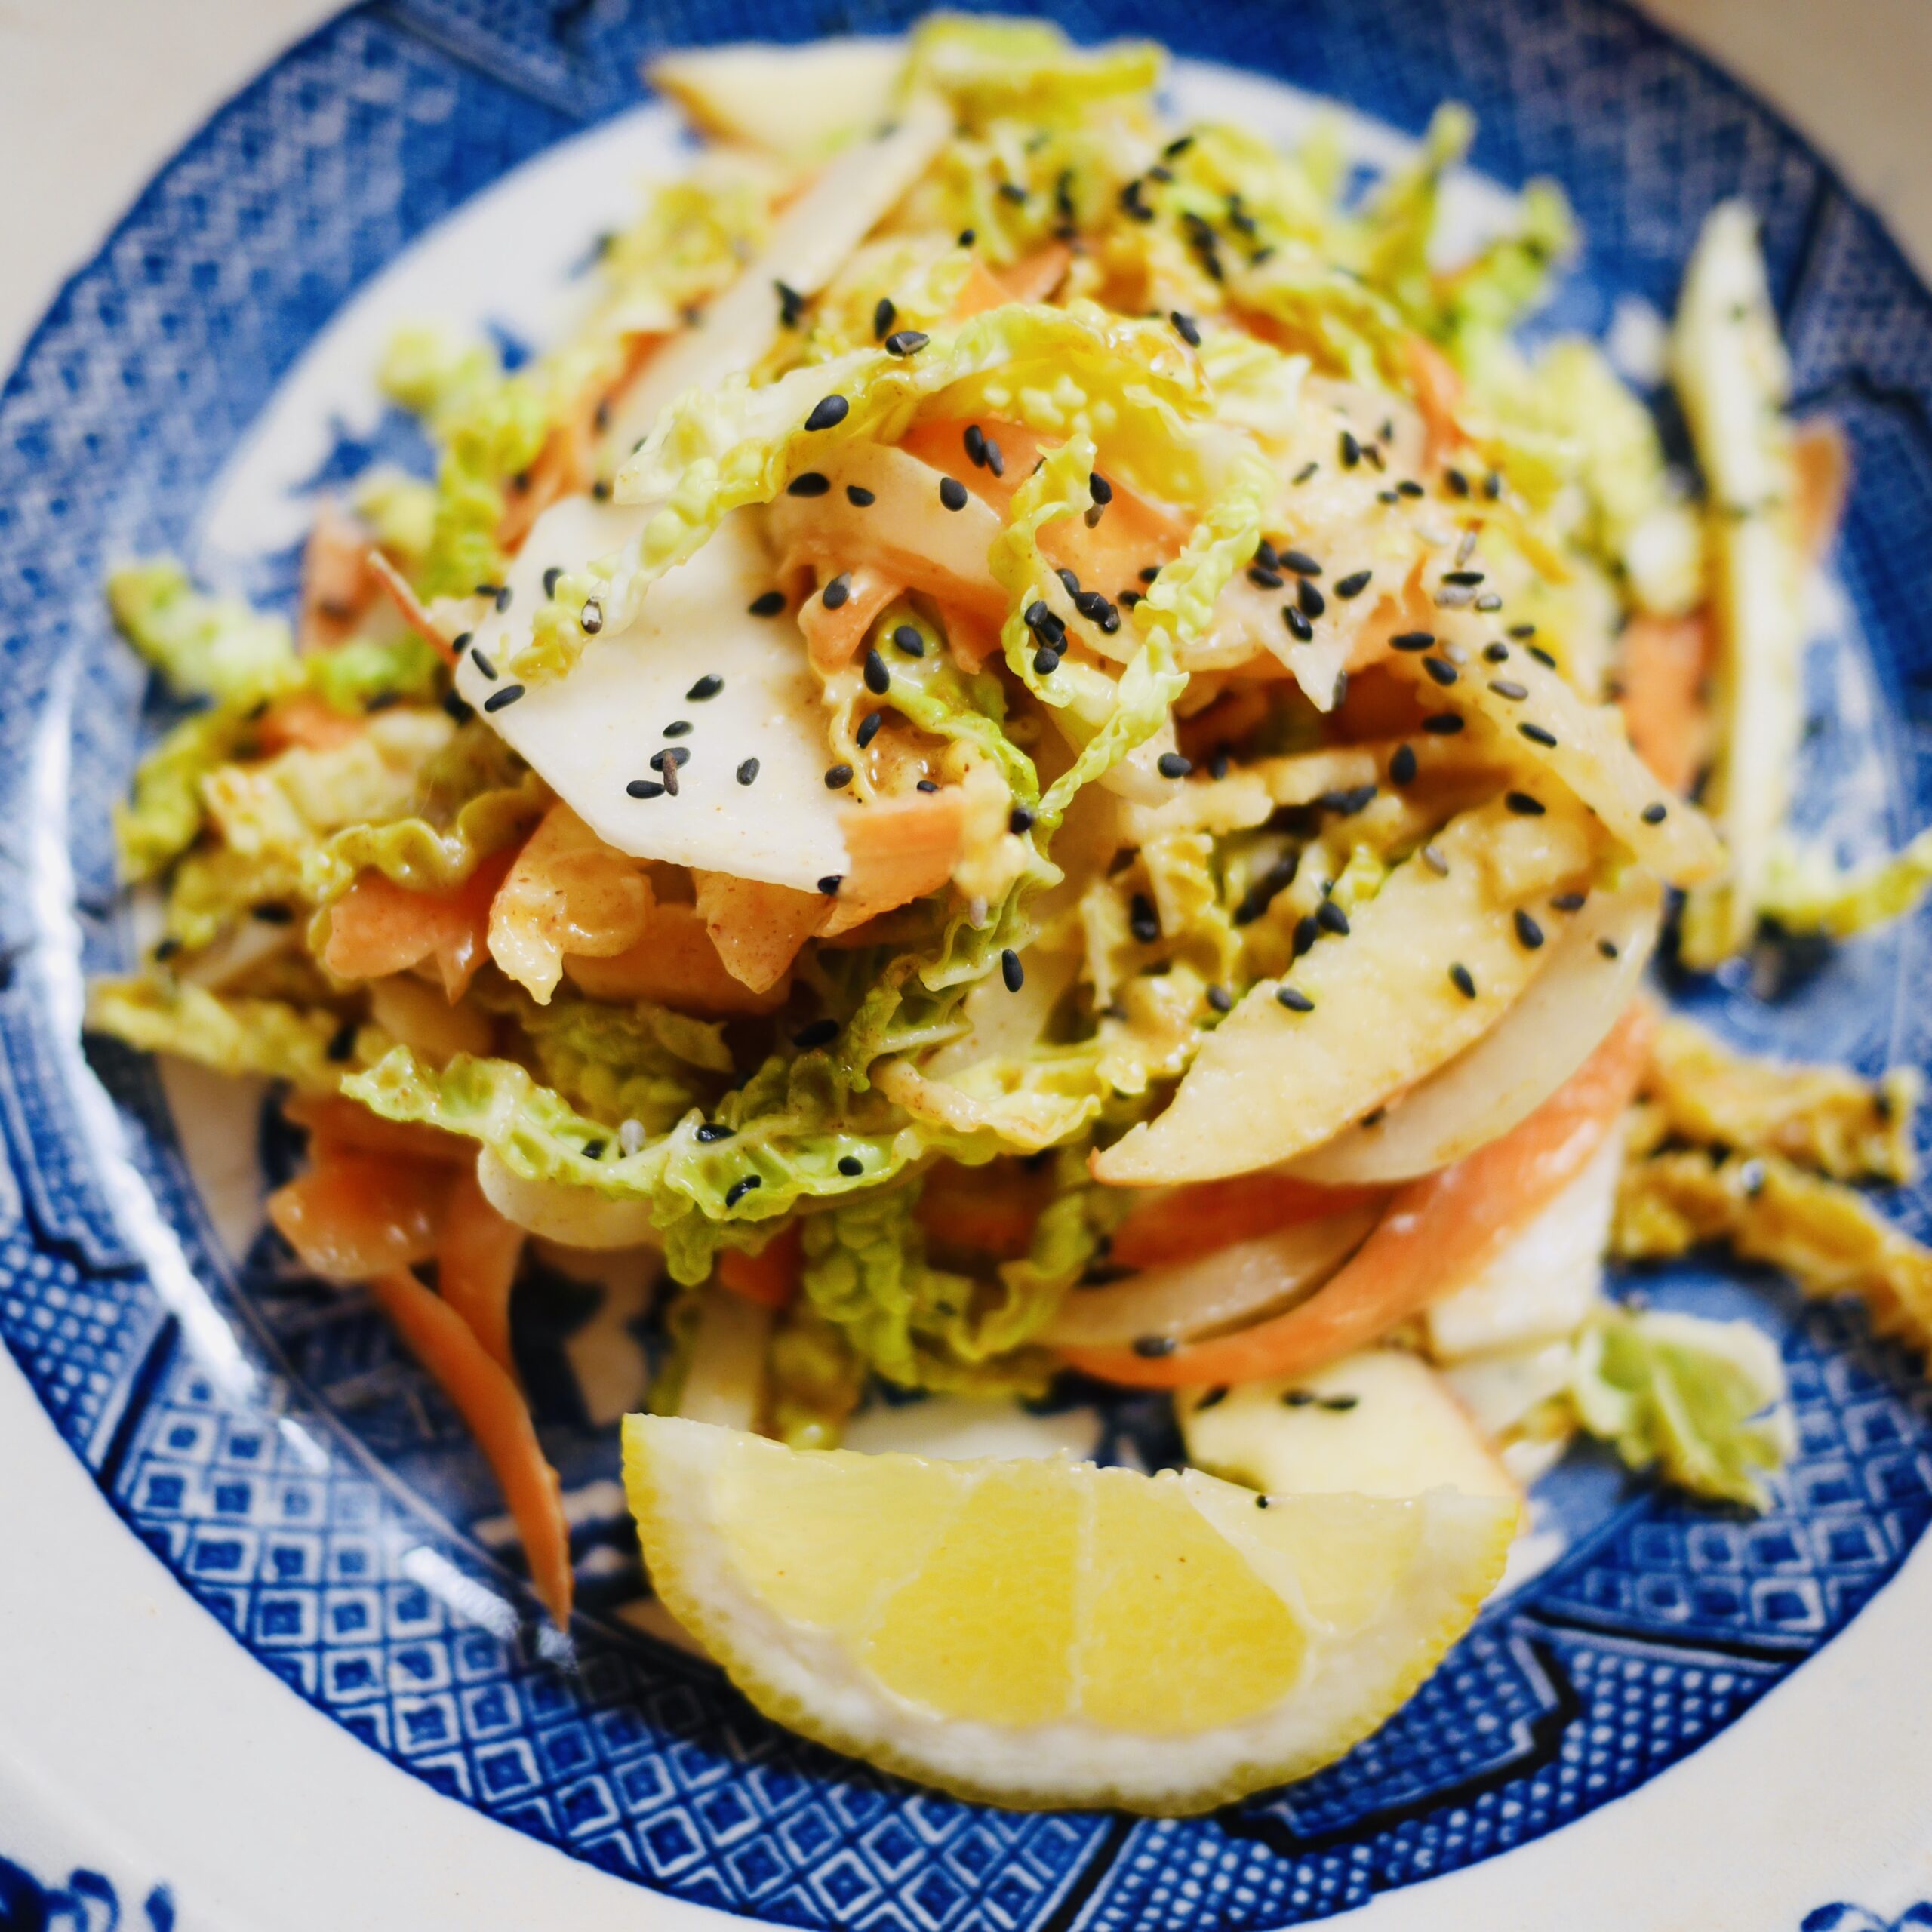 Turnip and Peanut Butter Slaw